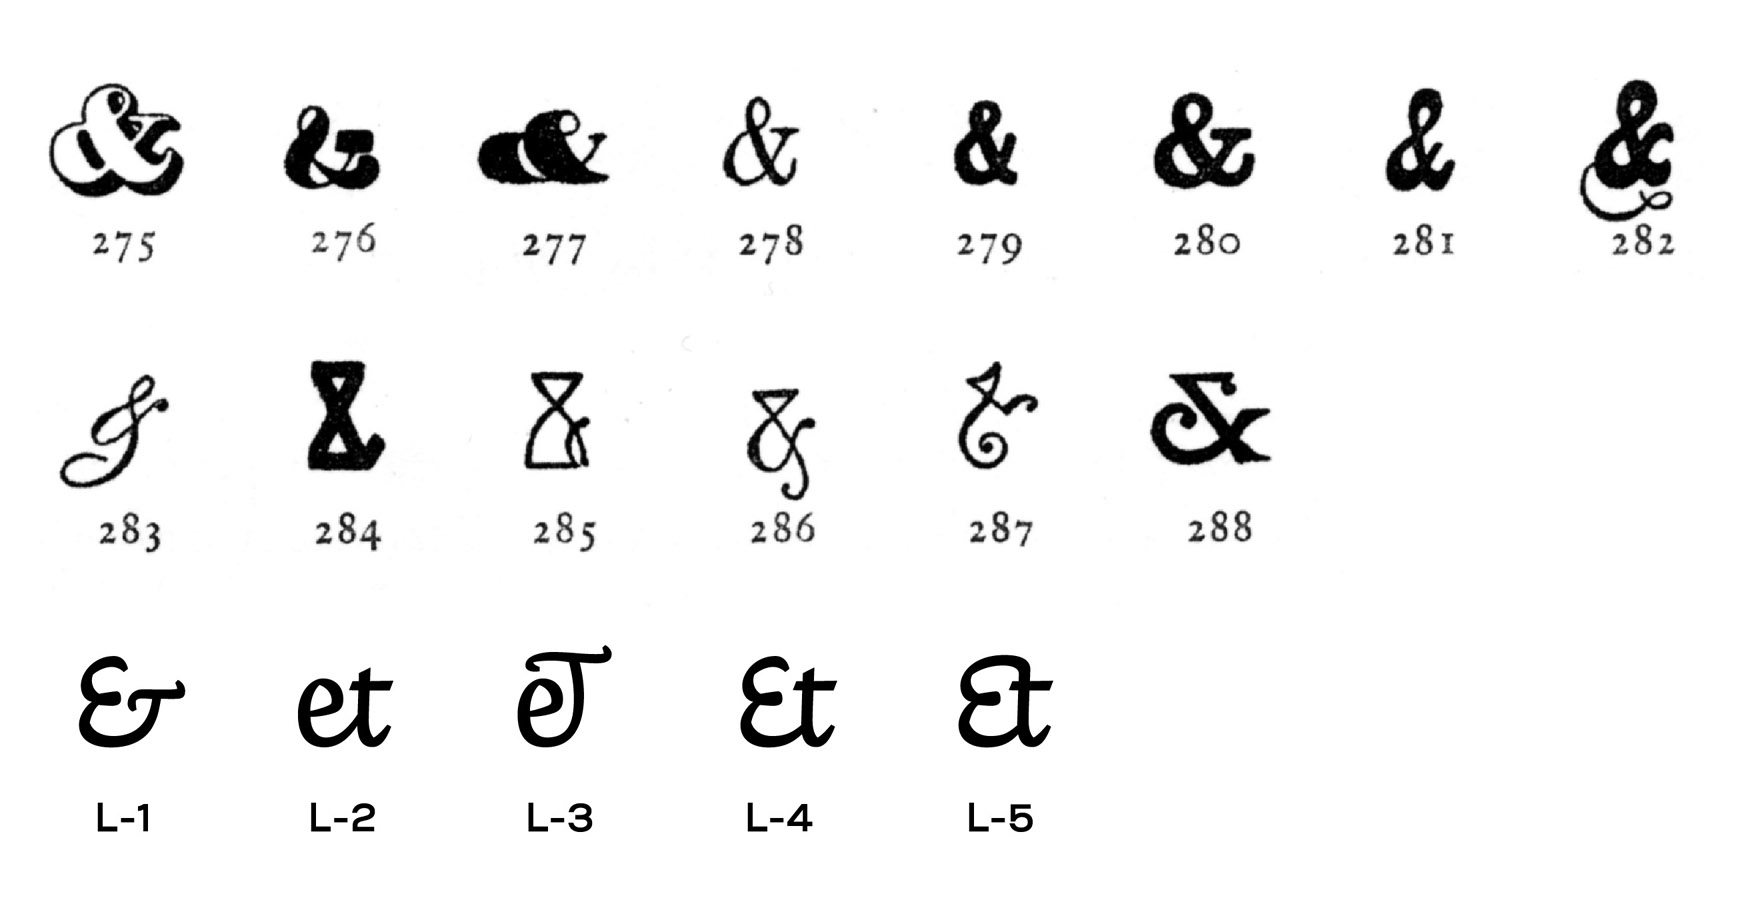 A is for Evolution of the ampersand